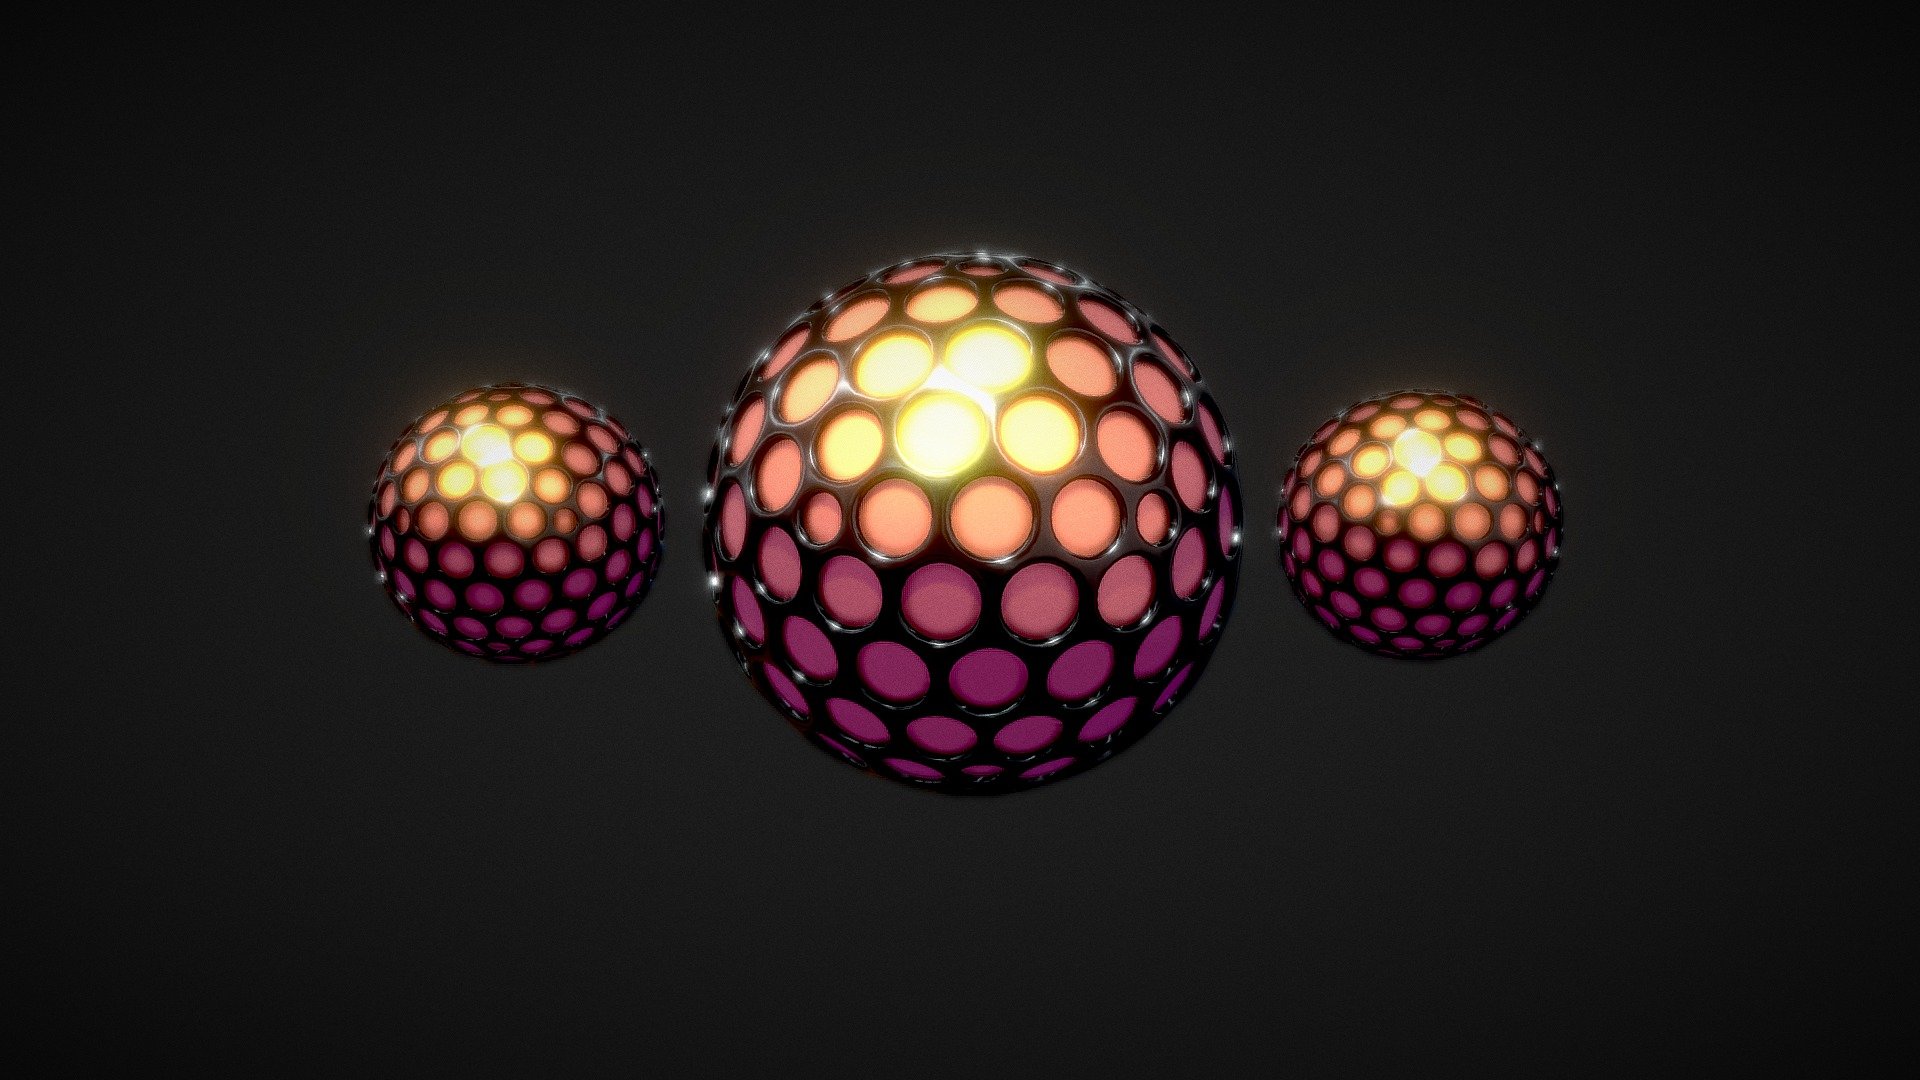 Abstract Spherical Object
3D Object by BlockedGravity

Get this model files in .obj, .mtl, .c4d, .fbx, .3ds  formats here:
Free Download* - Spherical (+Beveled Holes) - Download Free 3D model by BlockedGravity 3d model